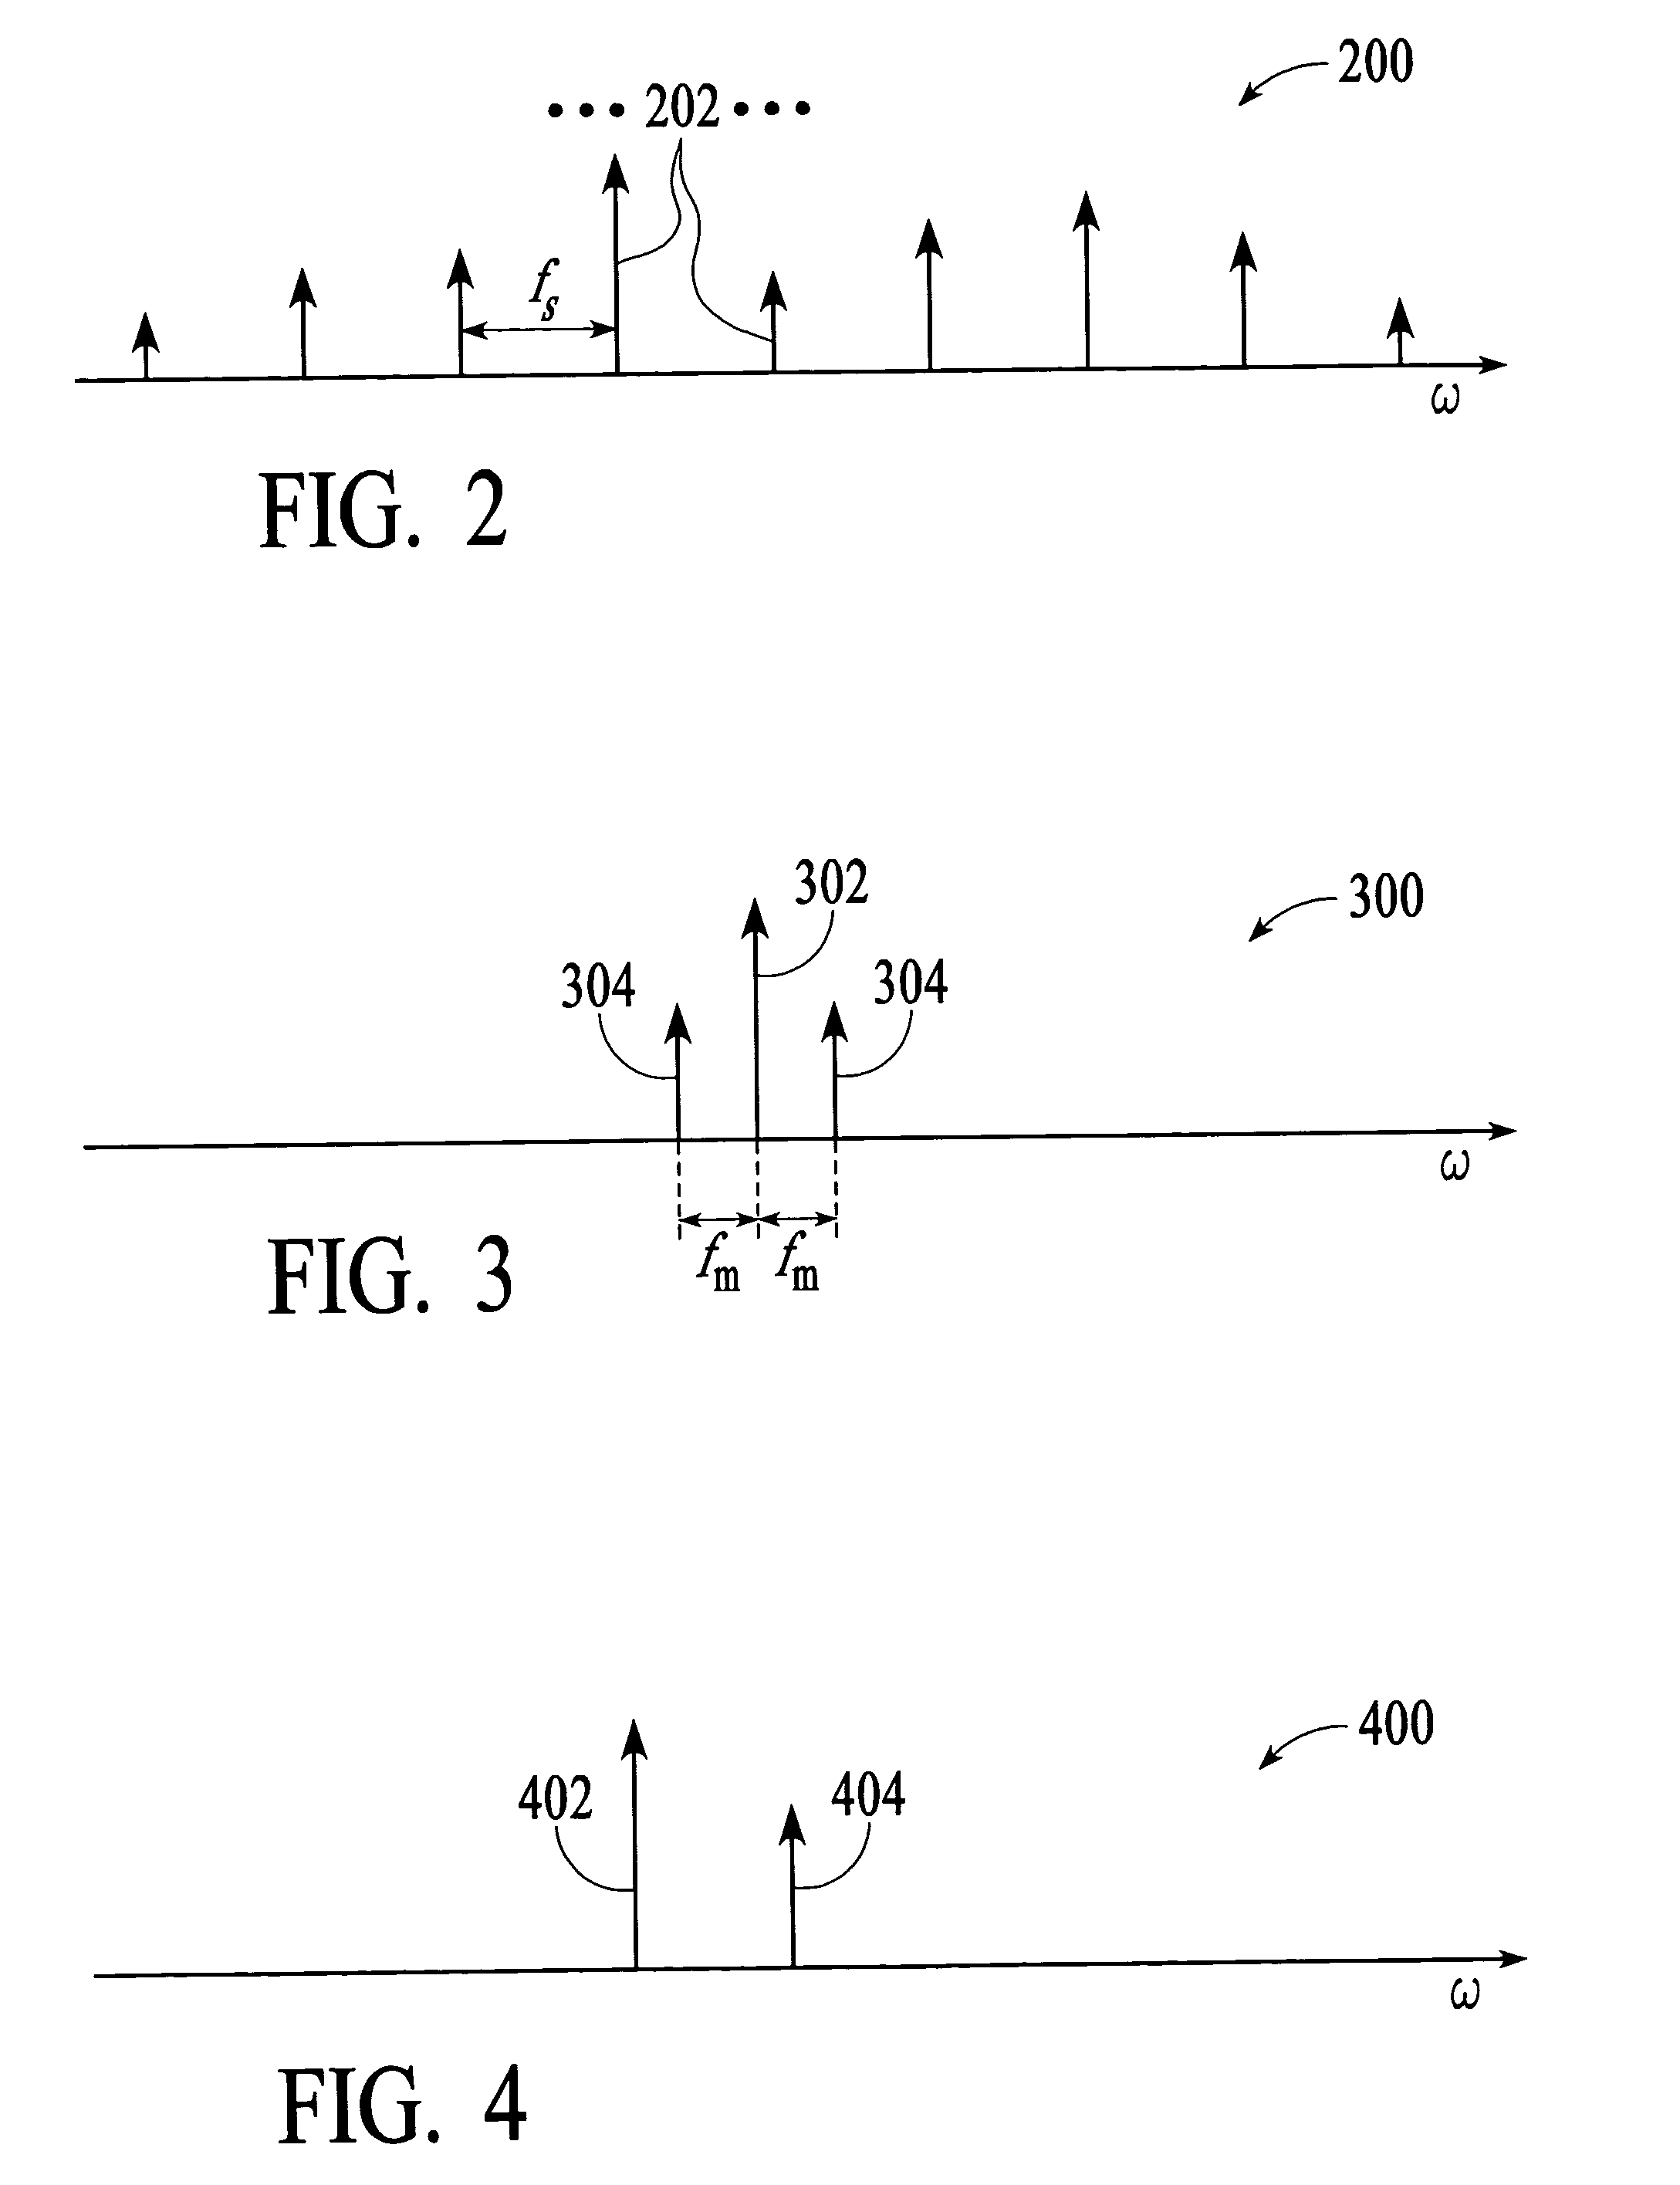 Optical analyzer and method for measuring spectral amplitude and phase of input optical signals using heterodyne architecture